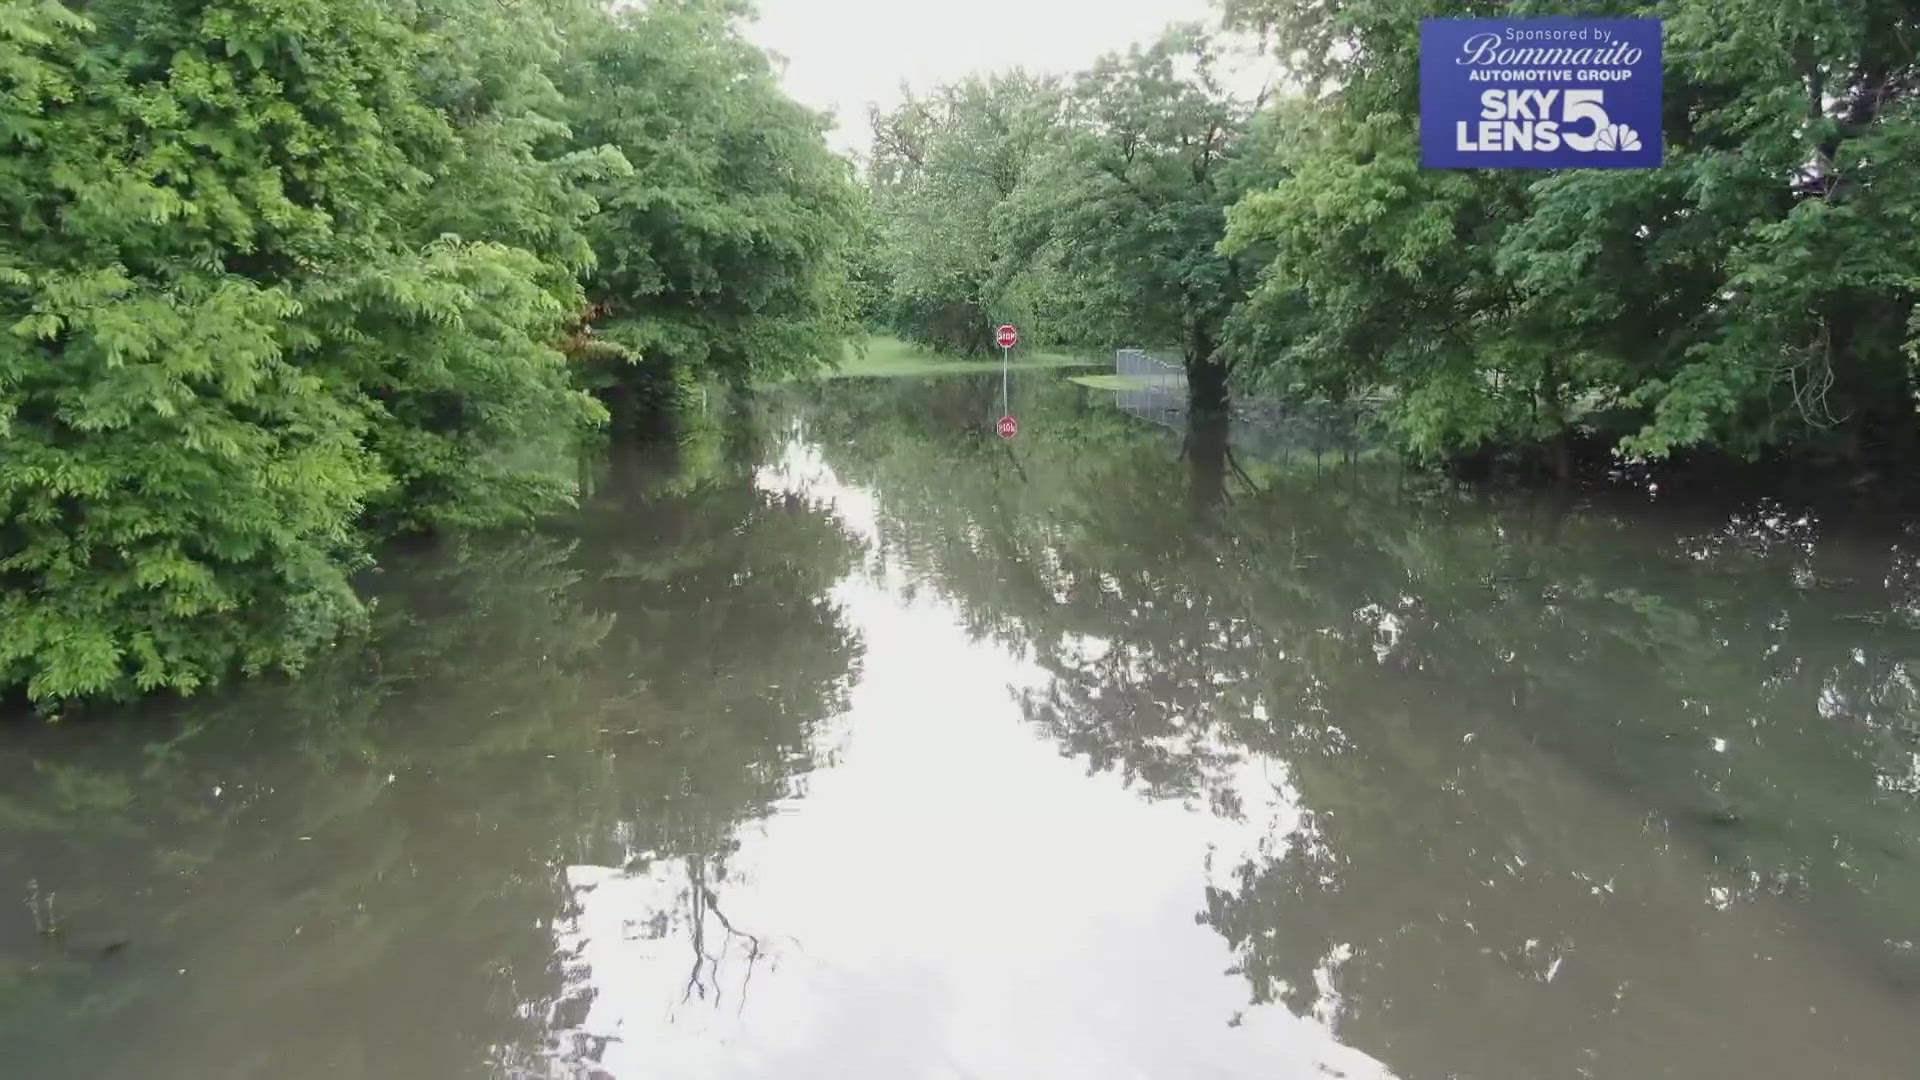 Many in the Bi-state are cleaning up Wednesday after sporadic showers caused flash flooding. Thursday storms could cause more issues for residents.